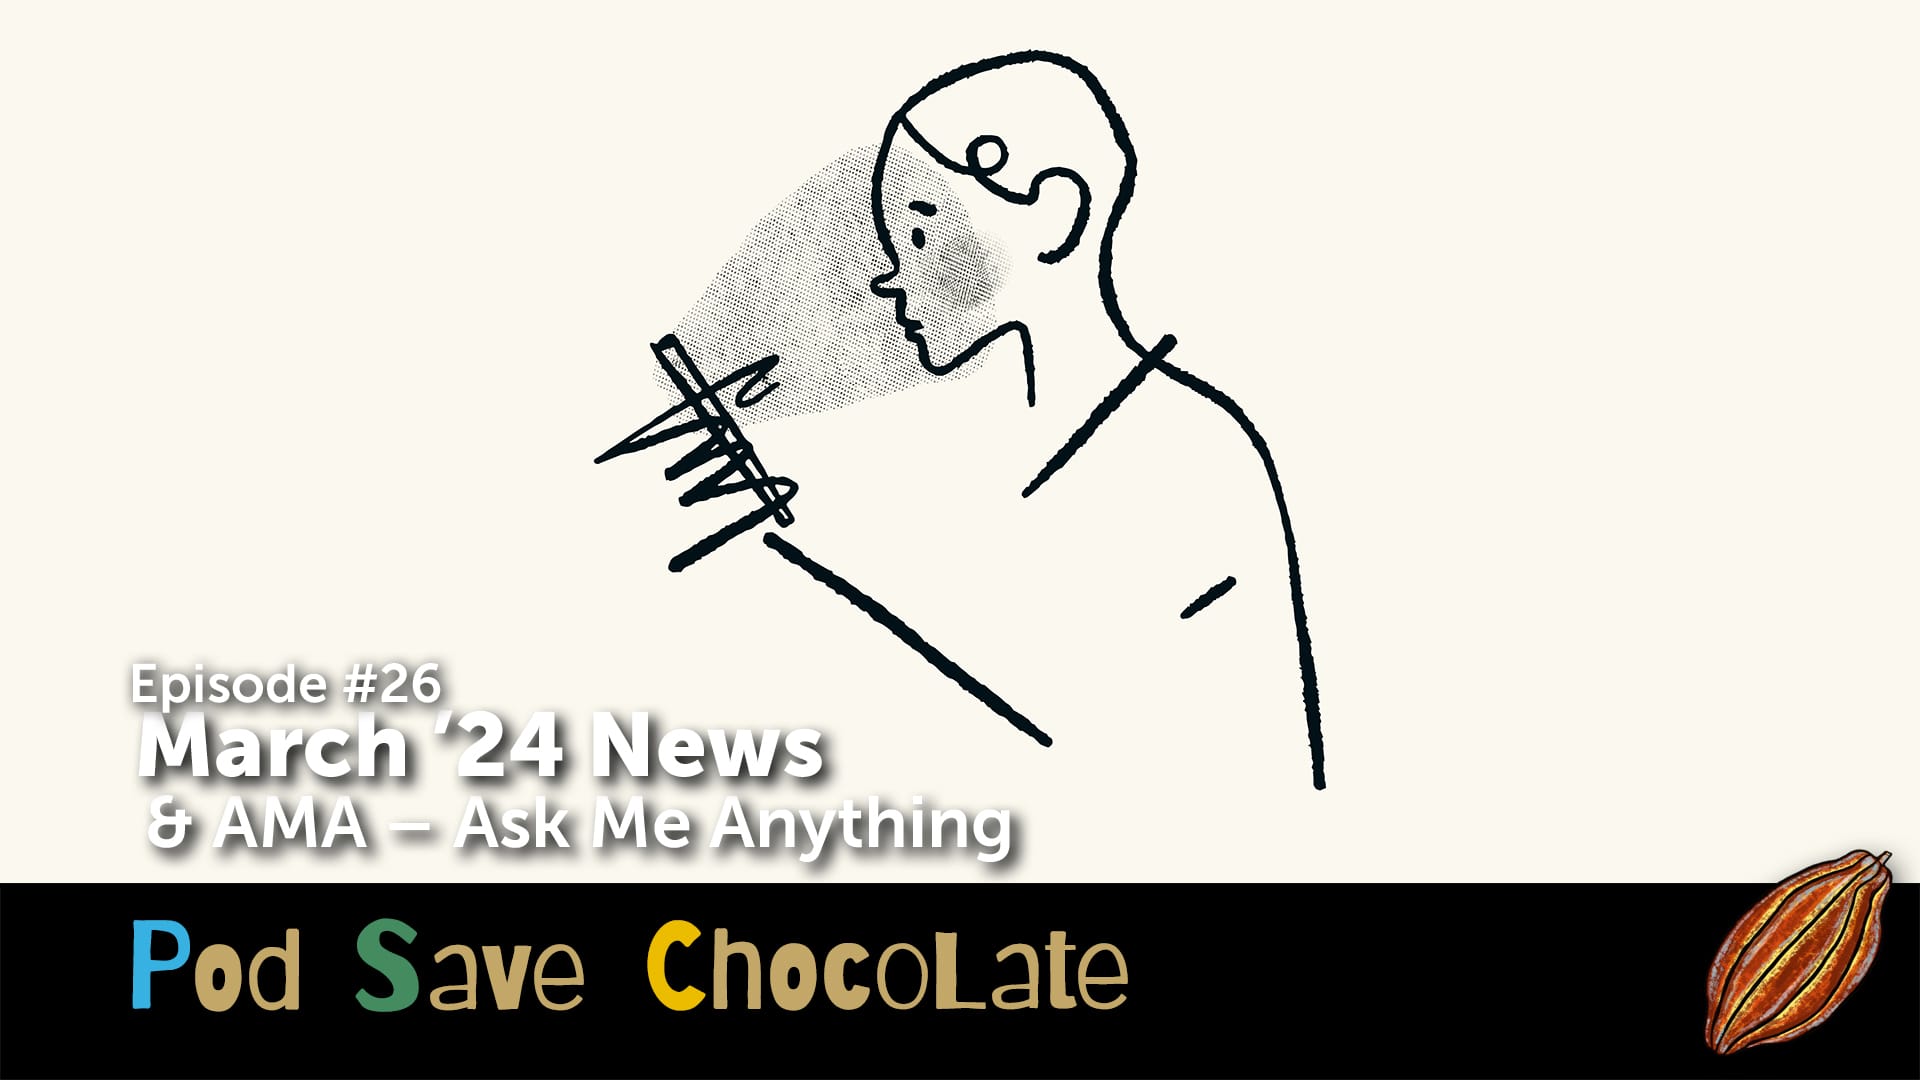 Mapping the Genetic Evolution of Cacao & March ’24 News/AMA | #PodSaveChocolate